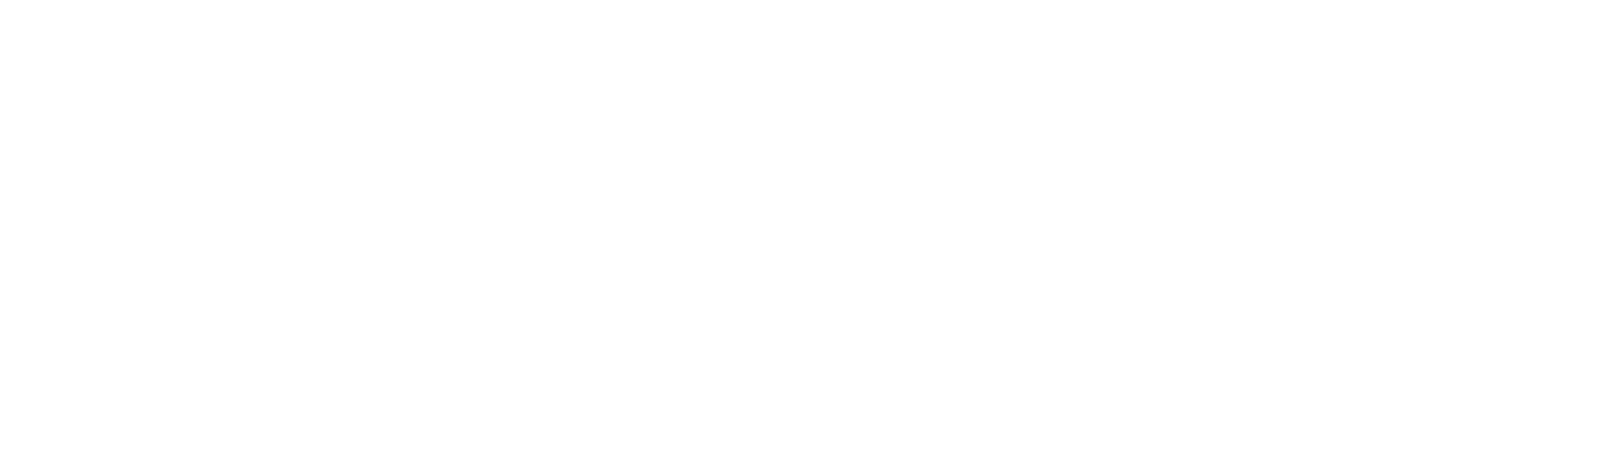 Pinnacle Event Management